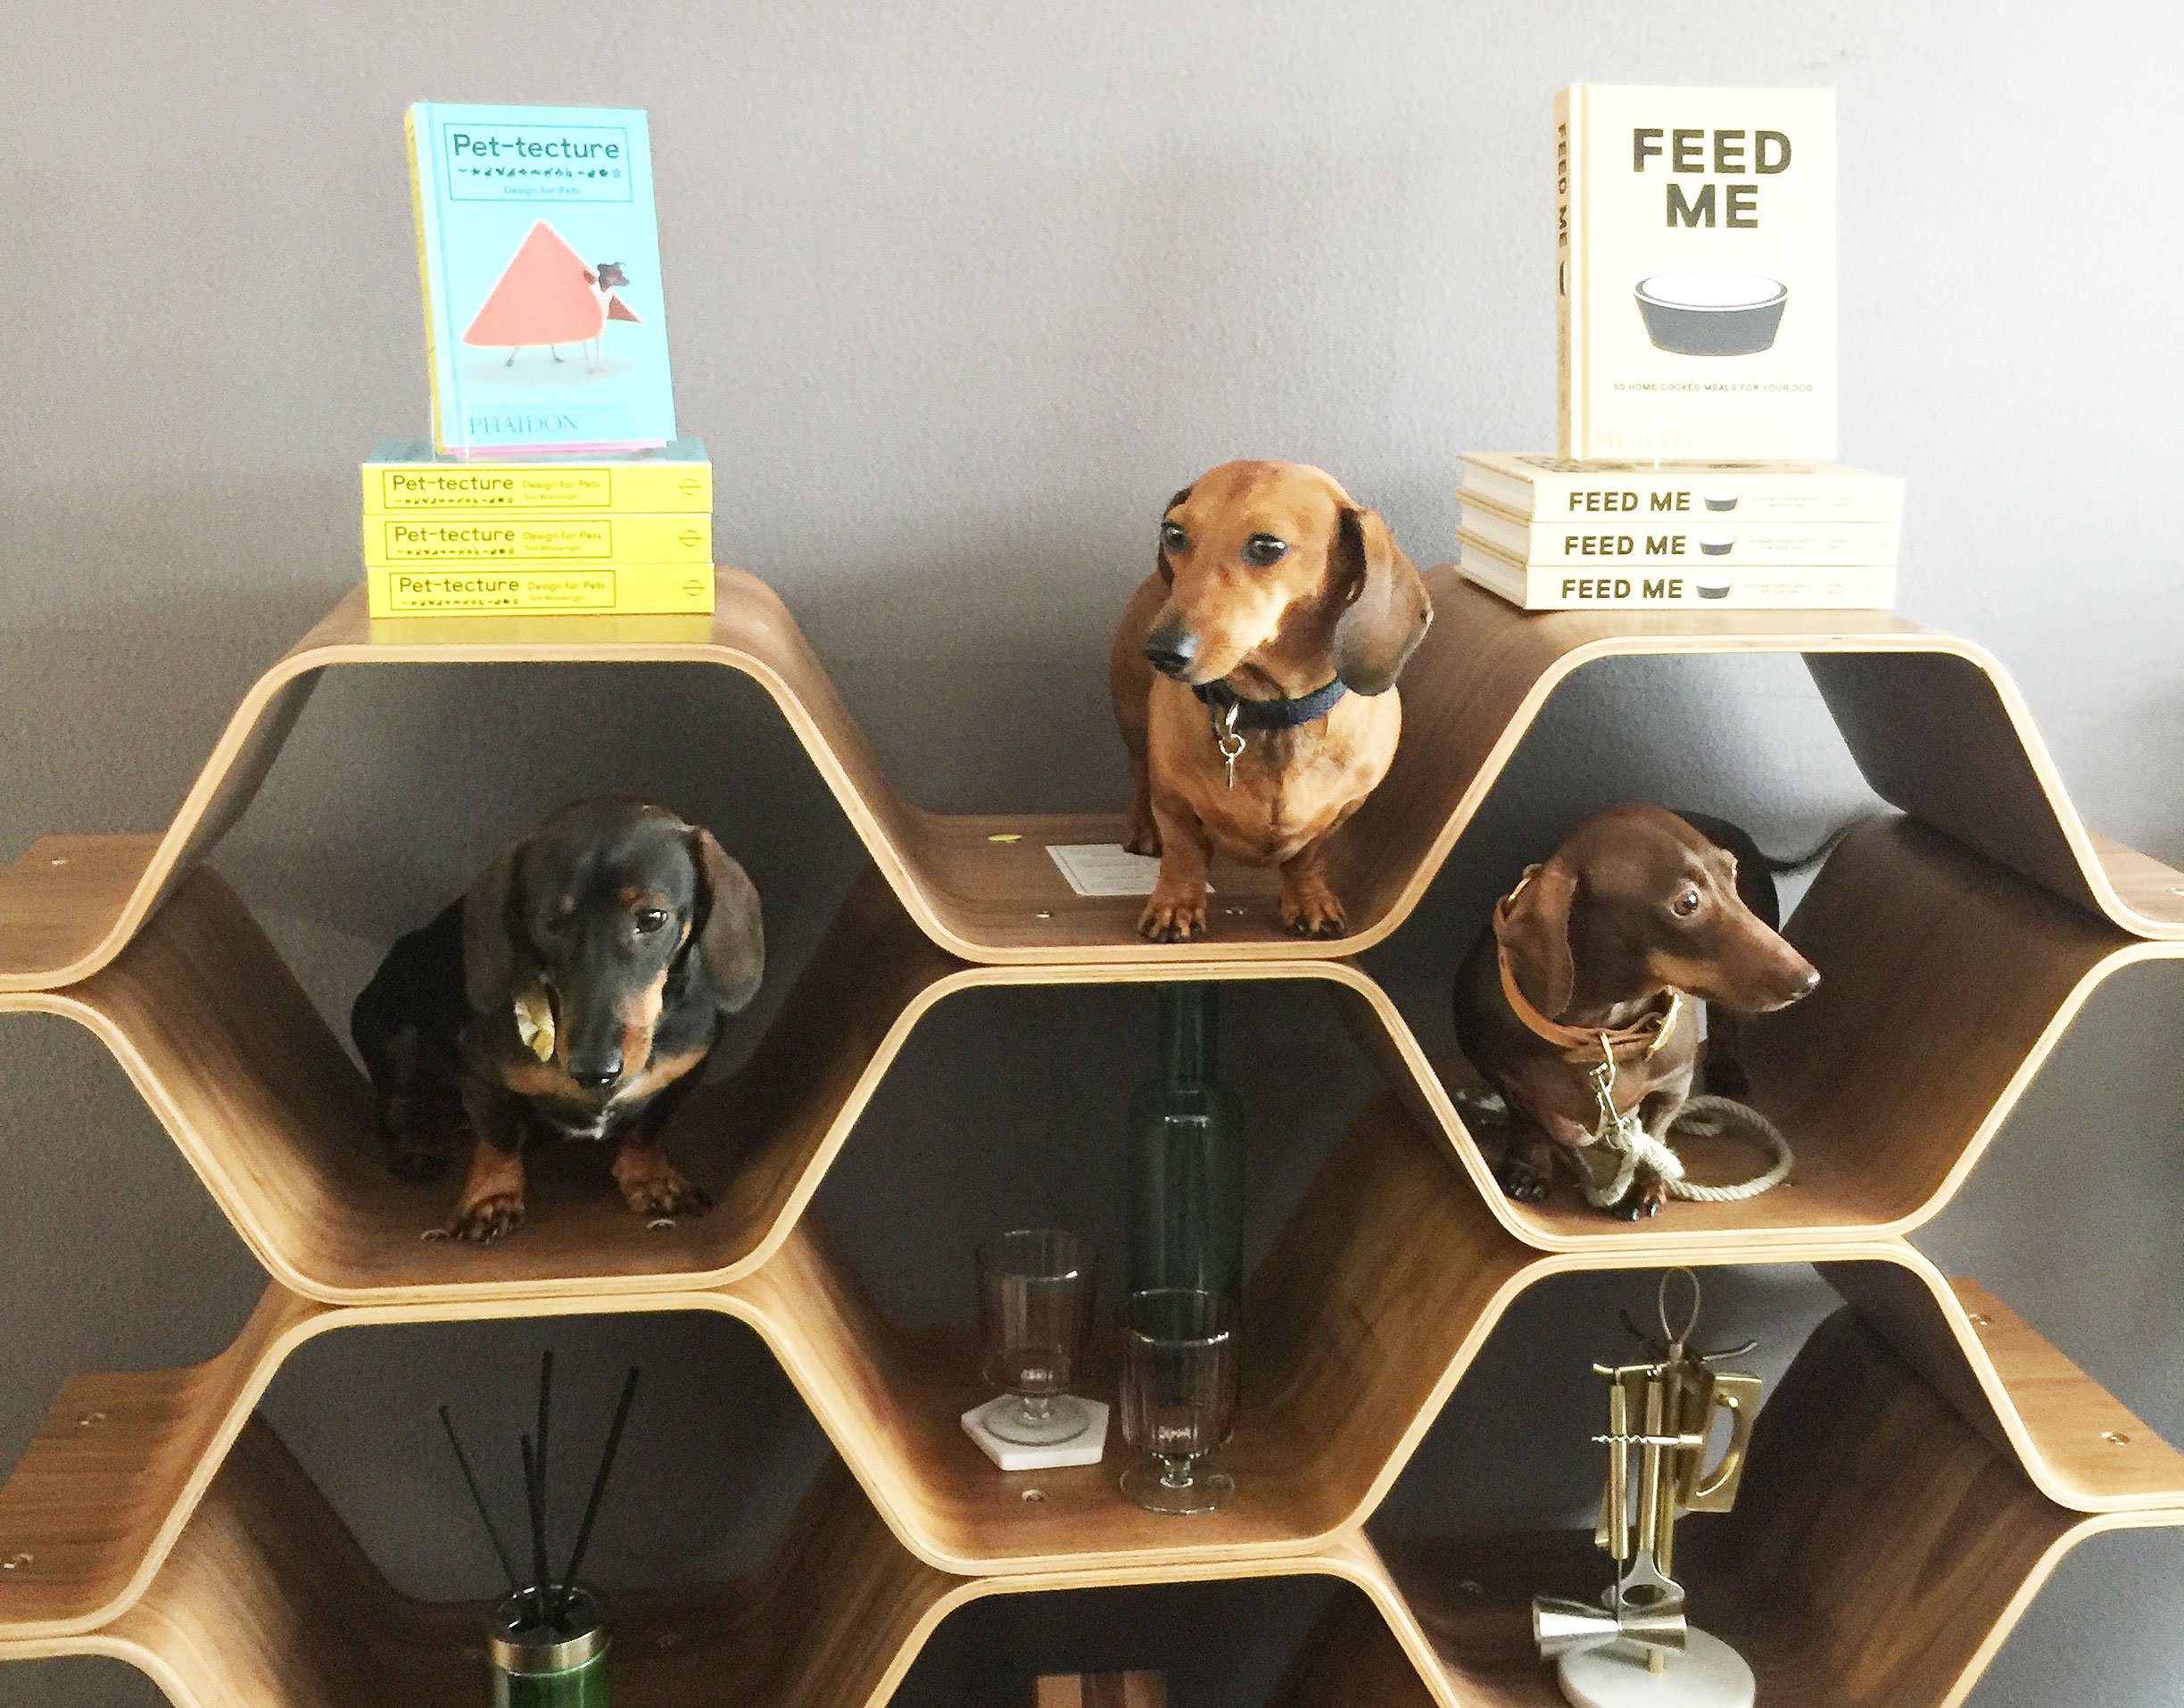 With such high profile guests there was inevitably the odd bit of shelf-im-paw-tance on show